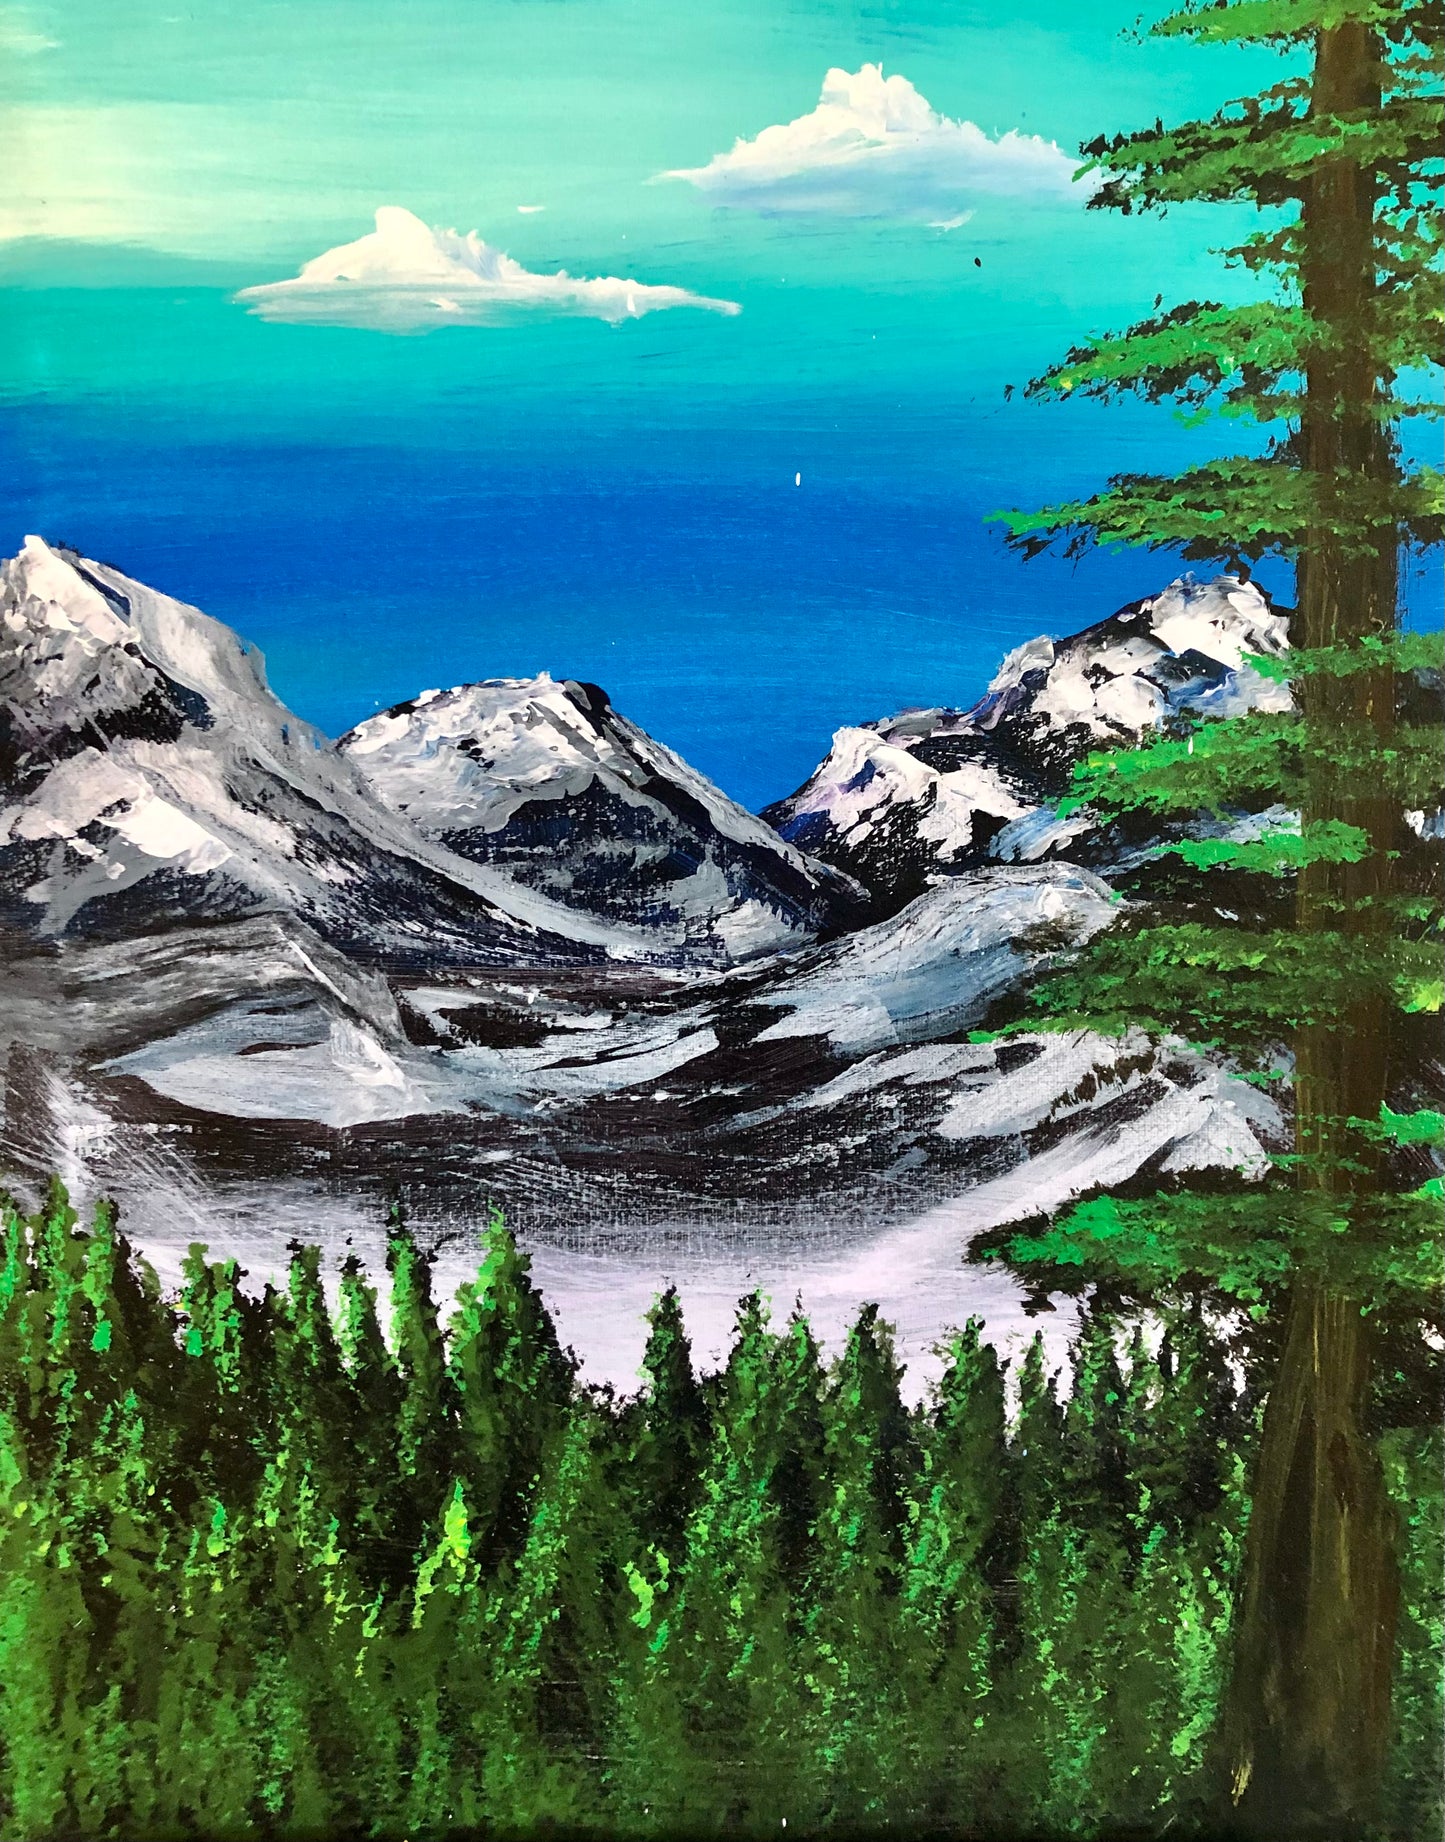 Snow Capped Mountains paint party!